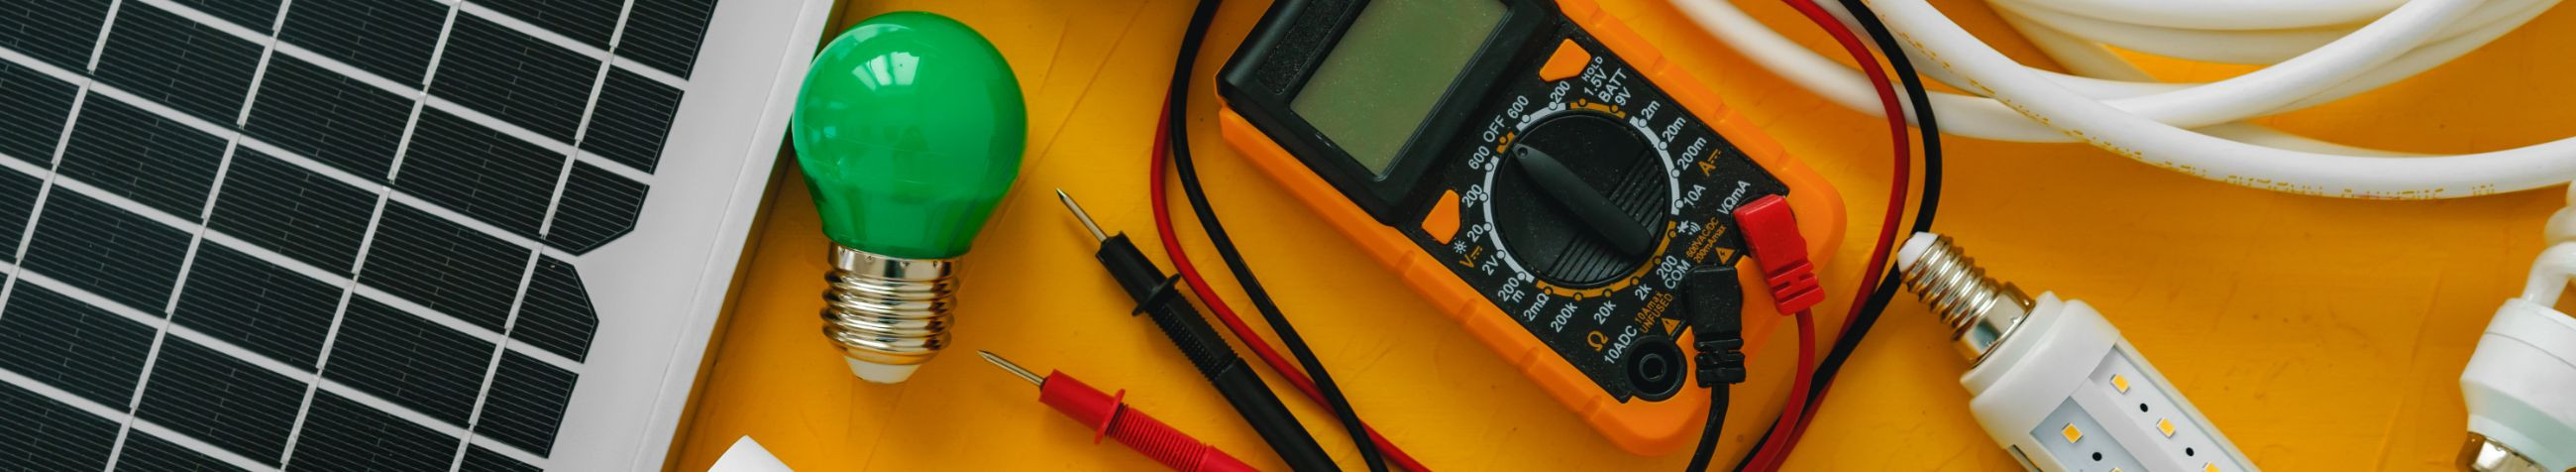 We provide comprehensive electrical services including assembly, inspection, and automation.